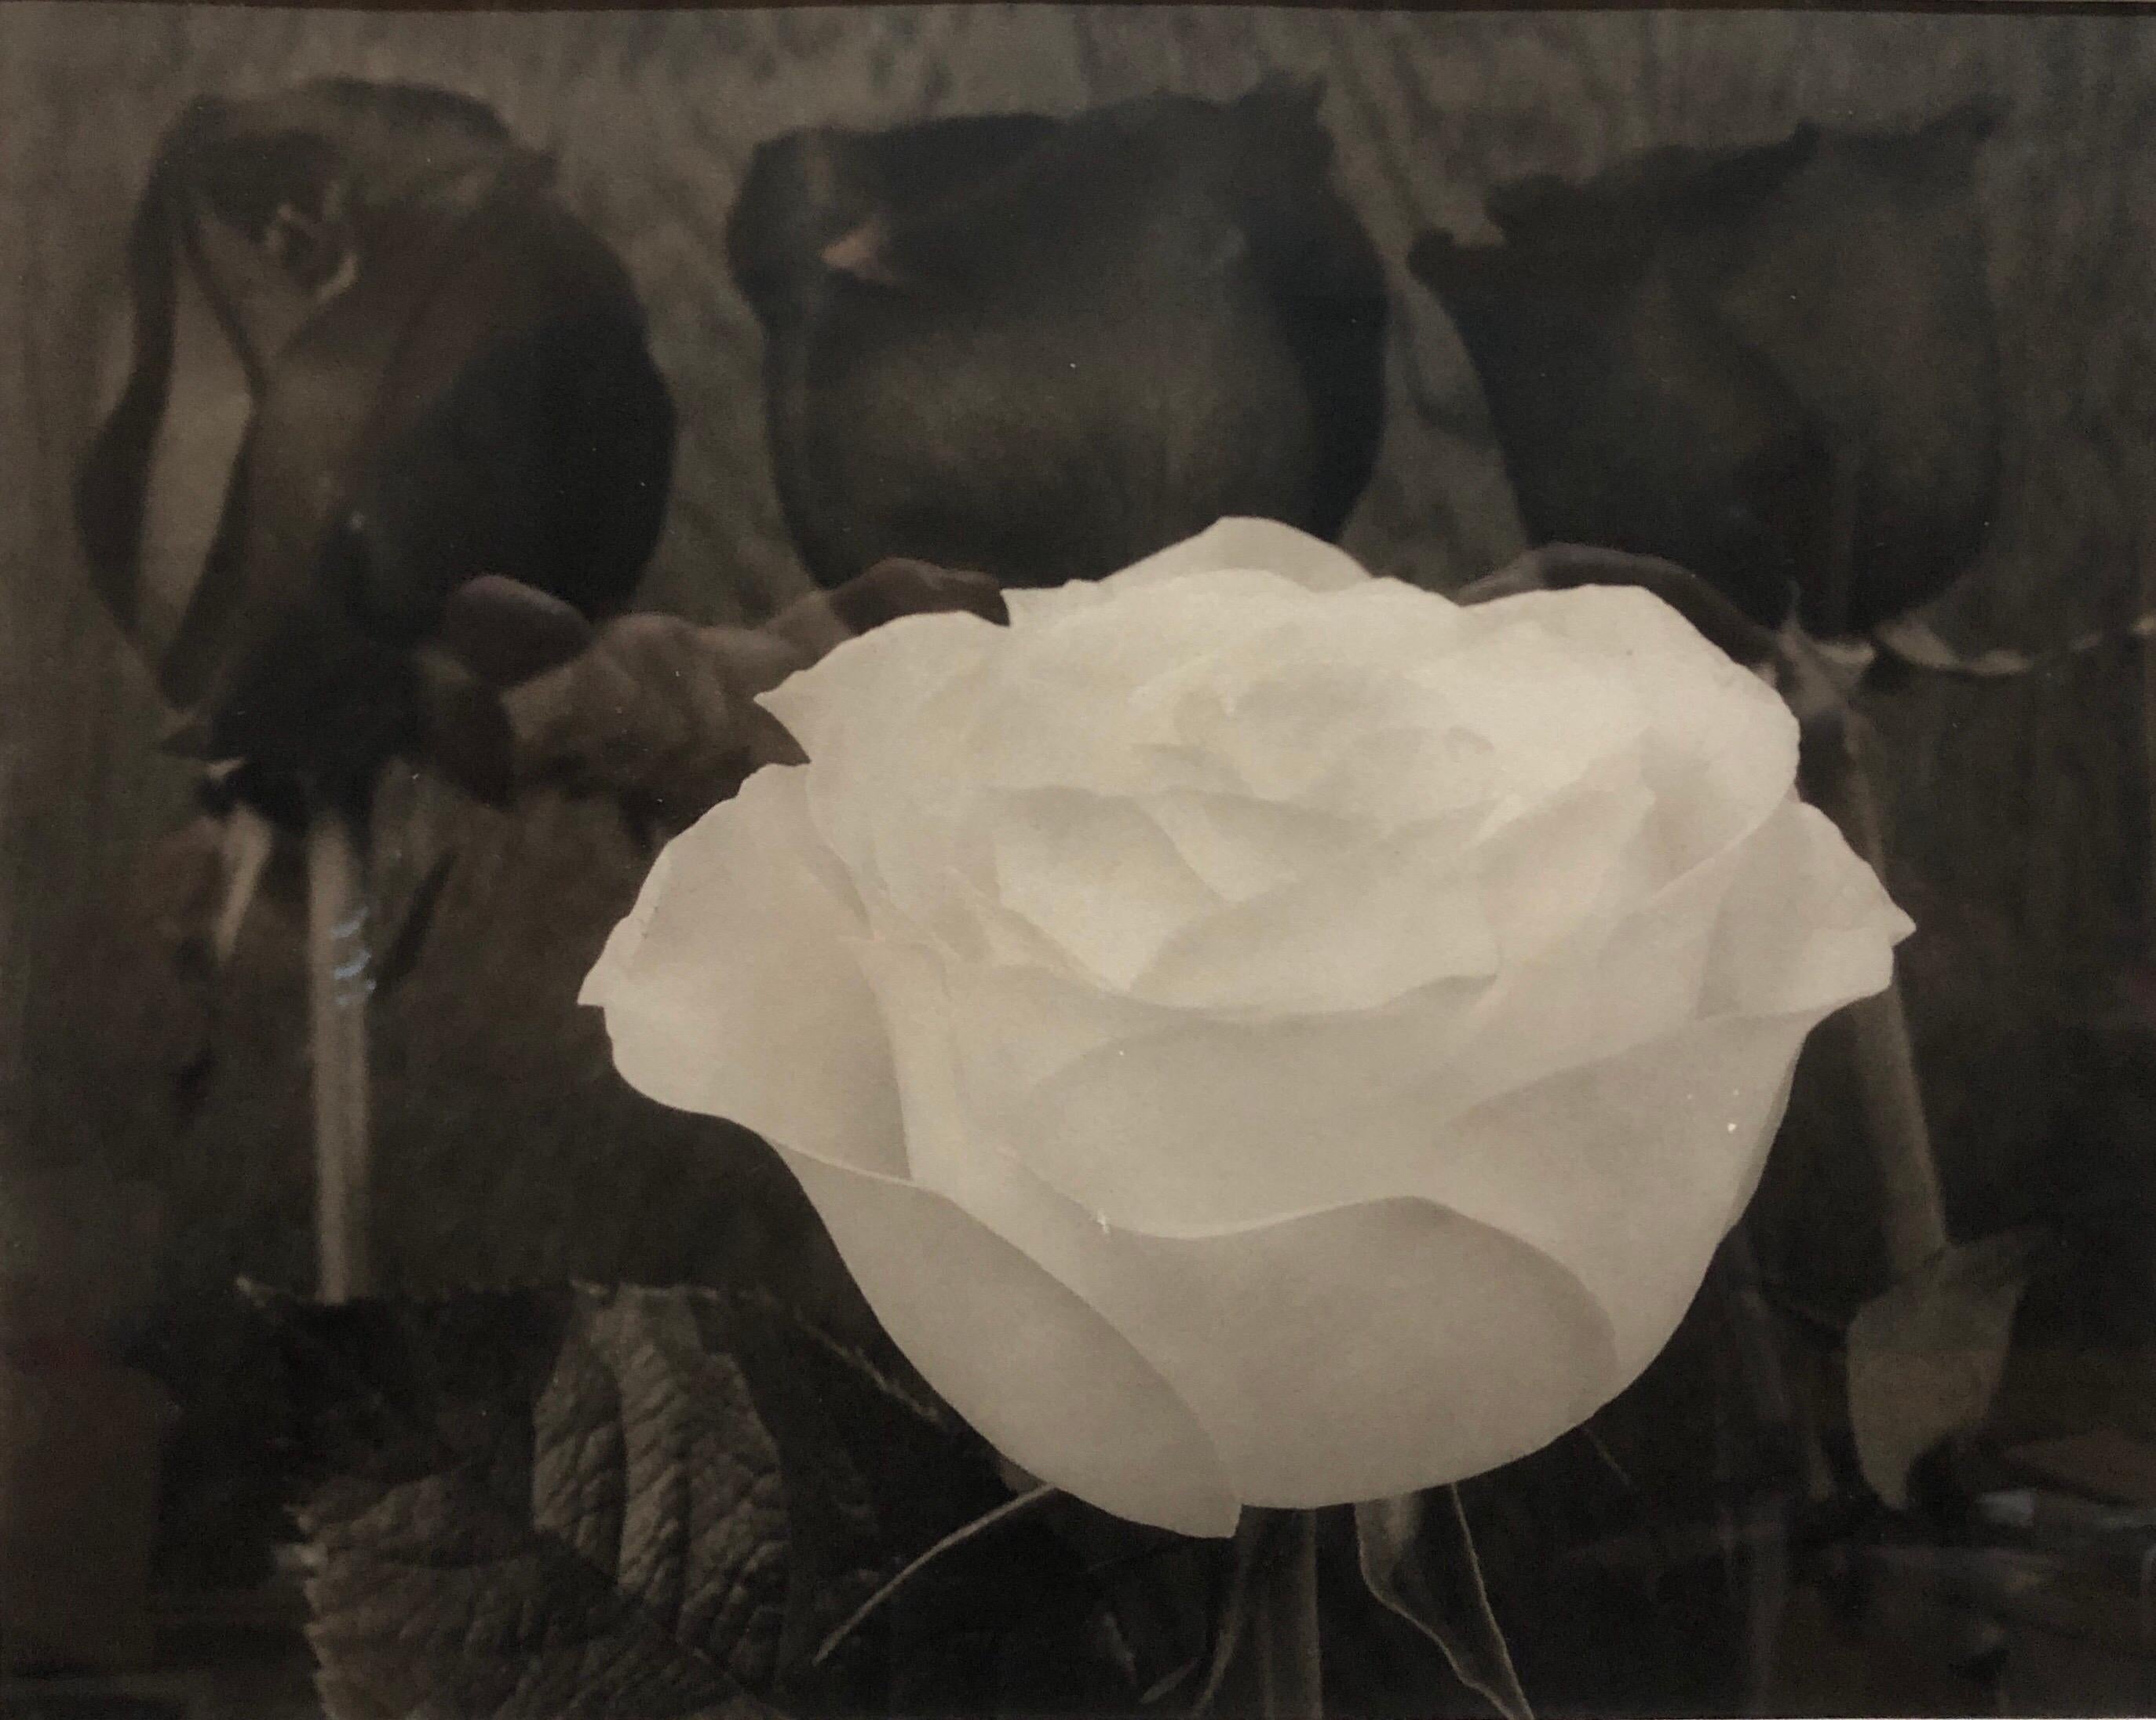 16.5x20.5, 7.5x9.5 actual image

Born in 1957 at Kalamazoo and raised in Detroit, MI, Tom Ferguson has photographed still lifes, flowers, botanicals, collage, city-scapes and landscapes. He works in platinum, palladium, cyanotype, gum, silver